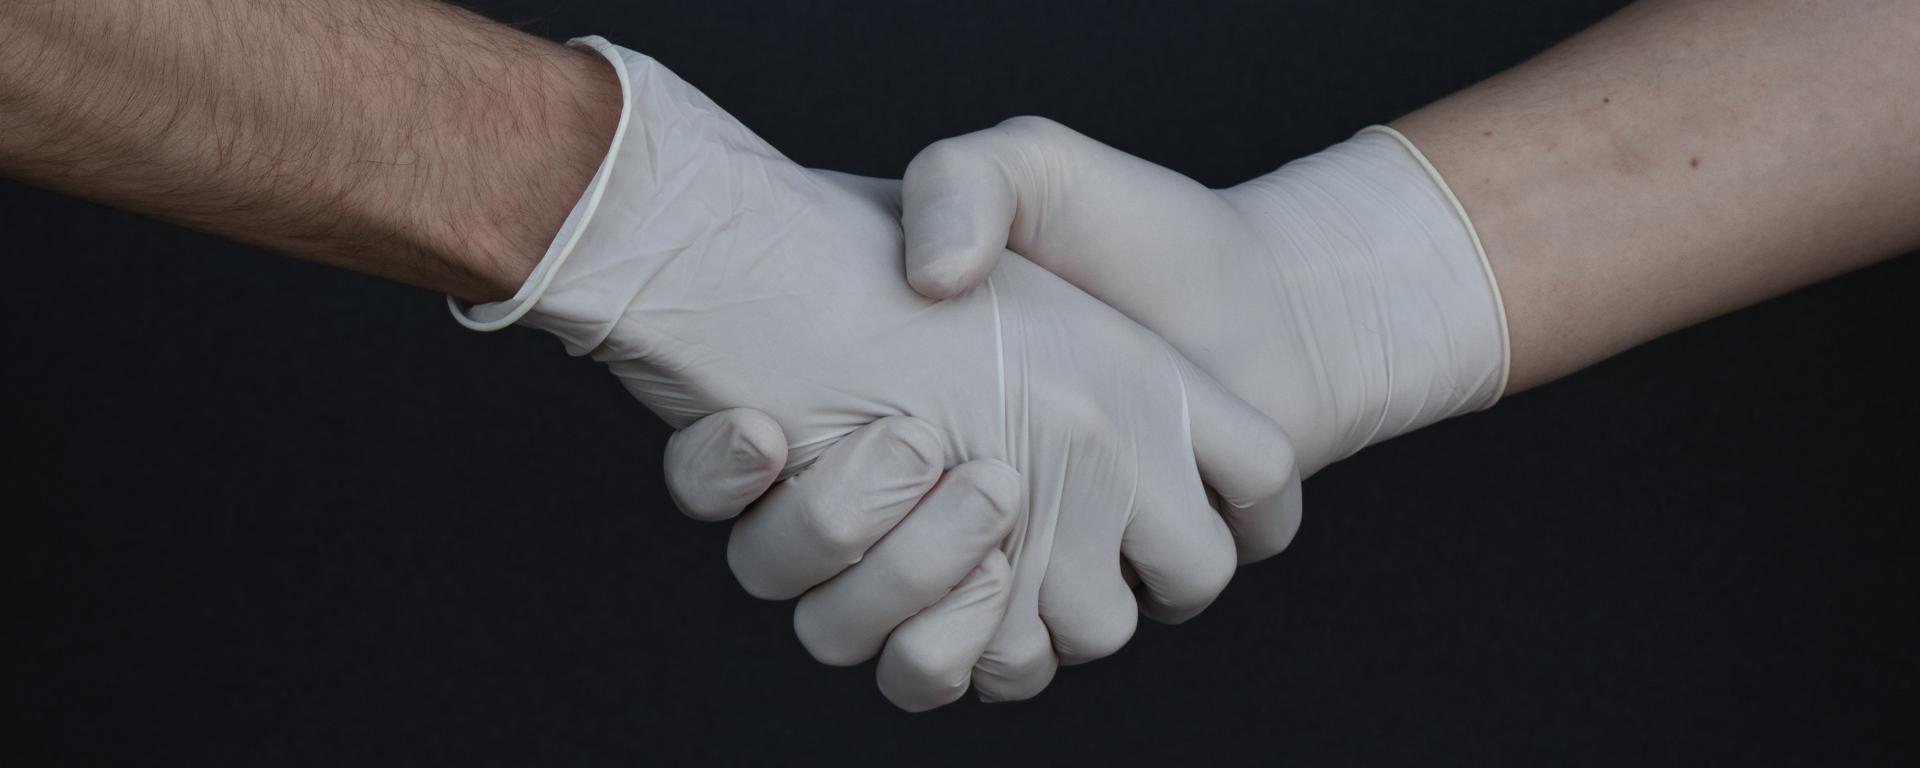 People Shaking Hands in Latex Gloves by Branimir Balogovic